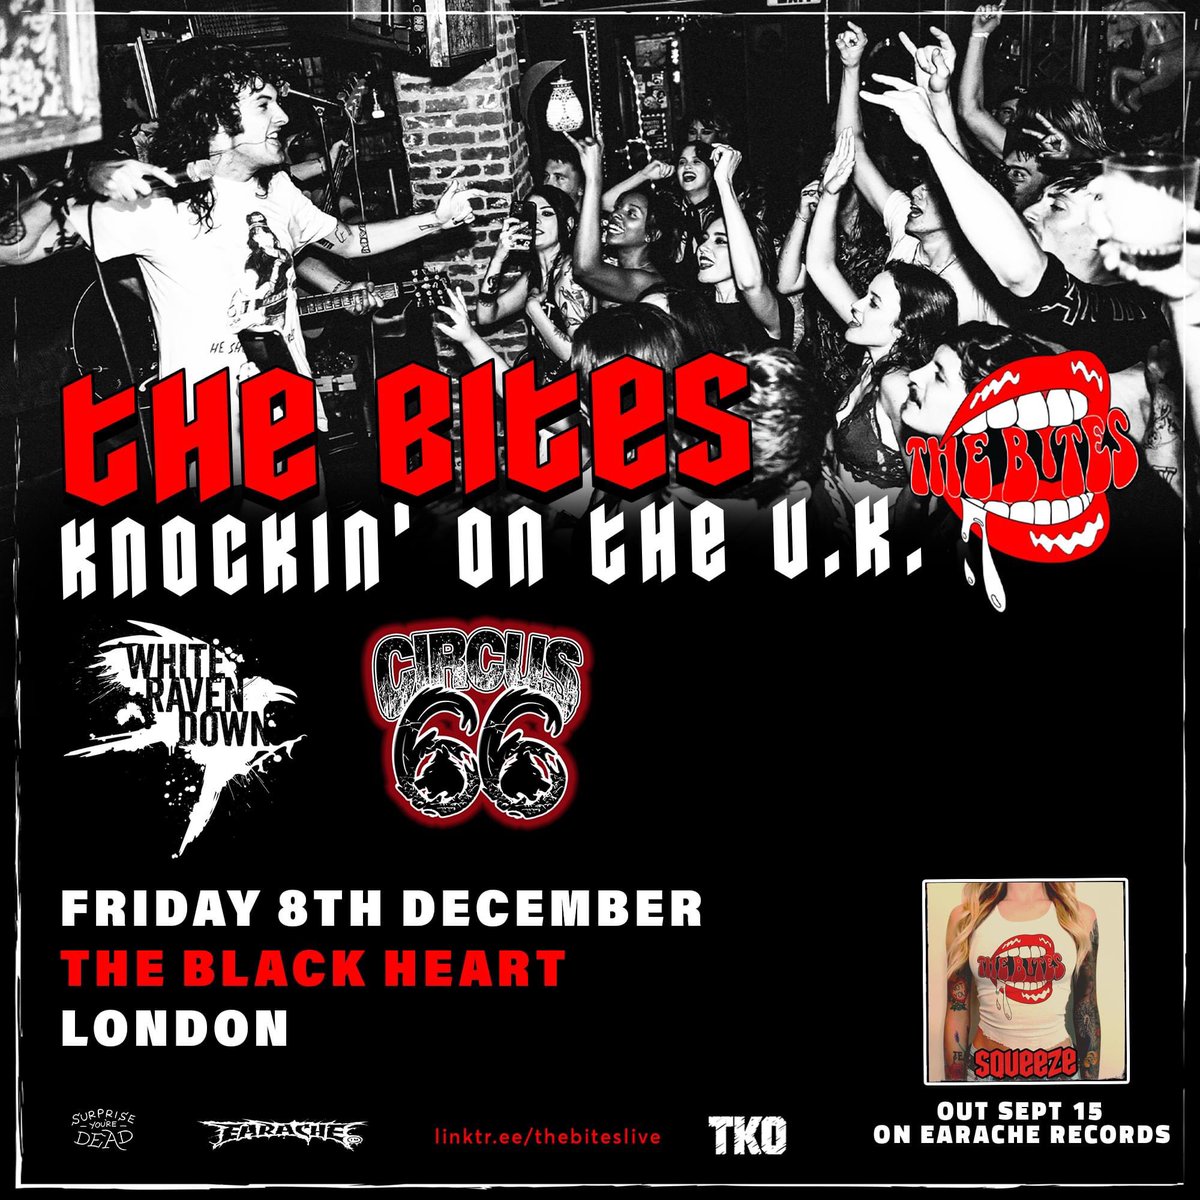 -- JUST ANNOUNCED -- We are stoked to be returning to London at the @Theblack_heart when we support @thebitesband along with our friends in @circus_66 on Friday 8th December... Gonna be a blast and tickets are almost gone so get in there quick! whiteravendown.com #WRD